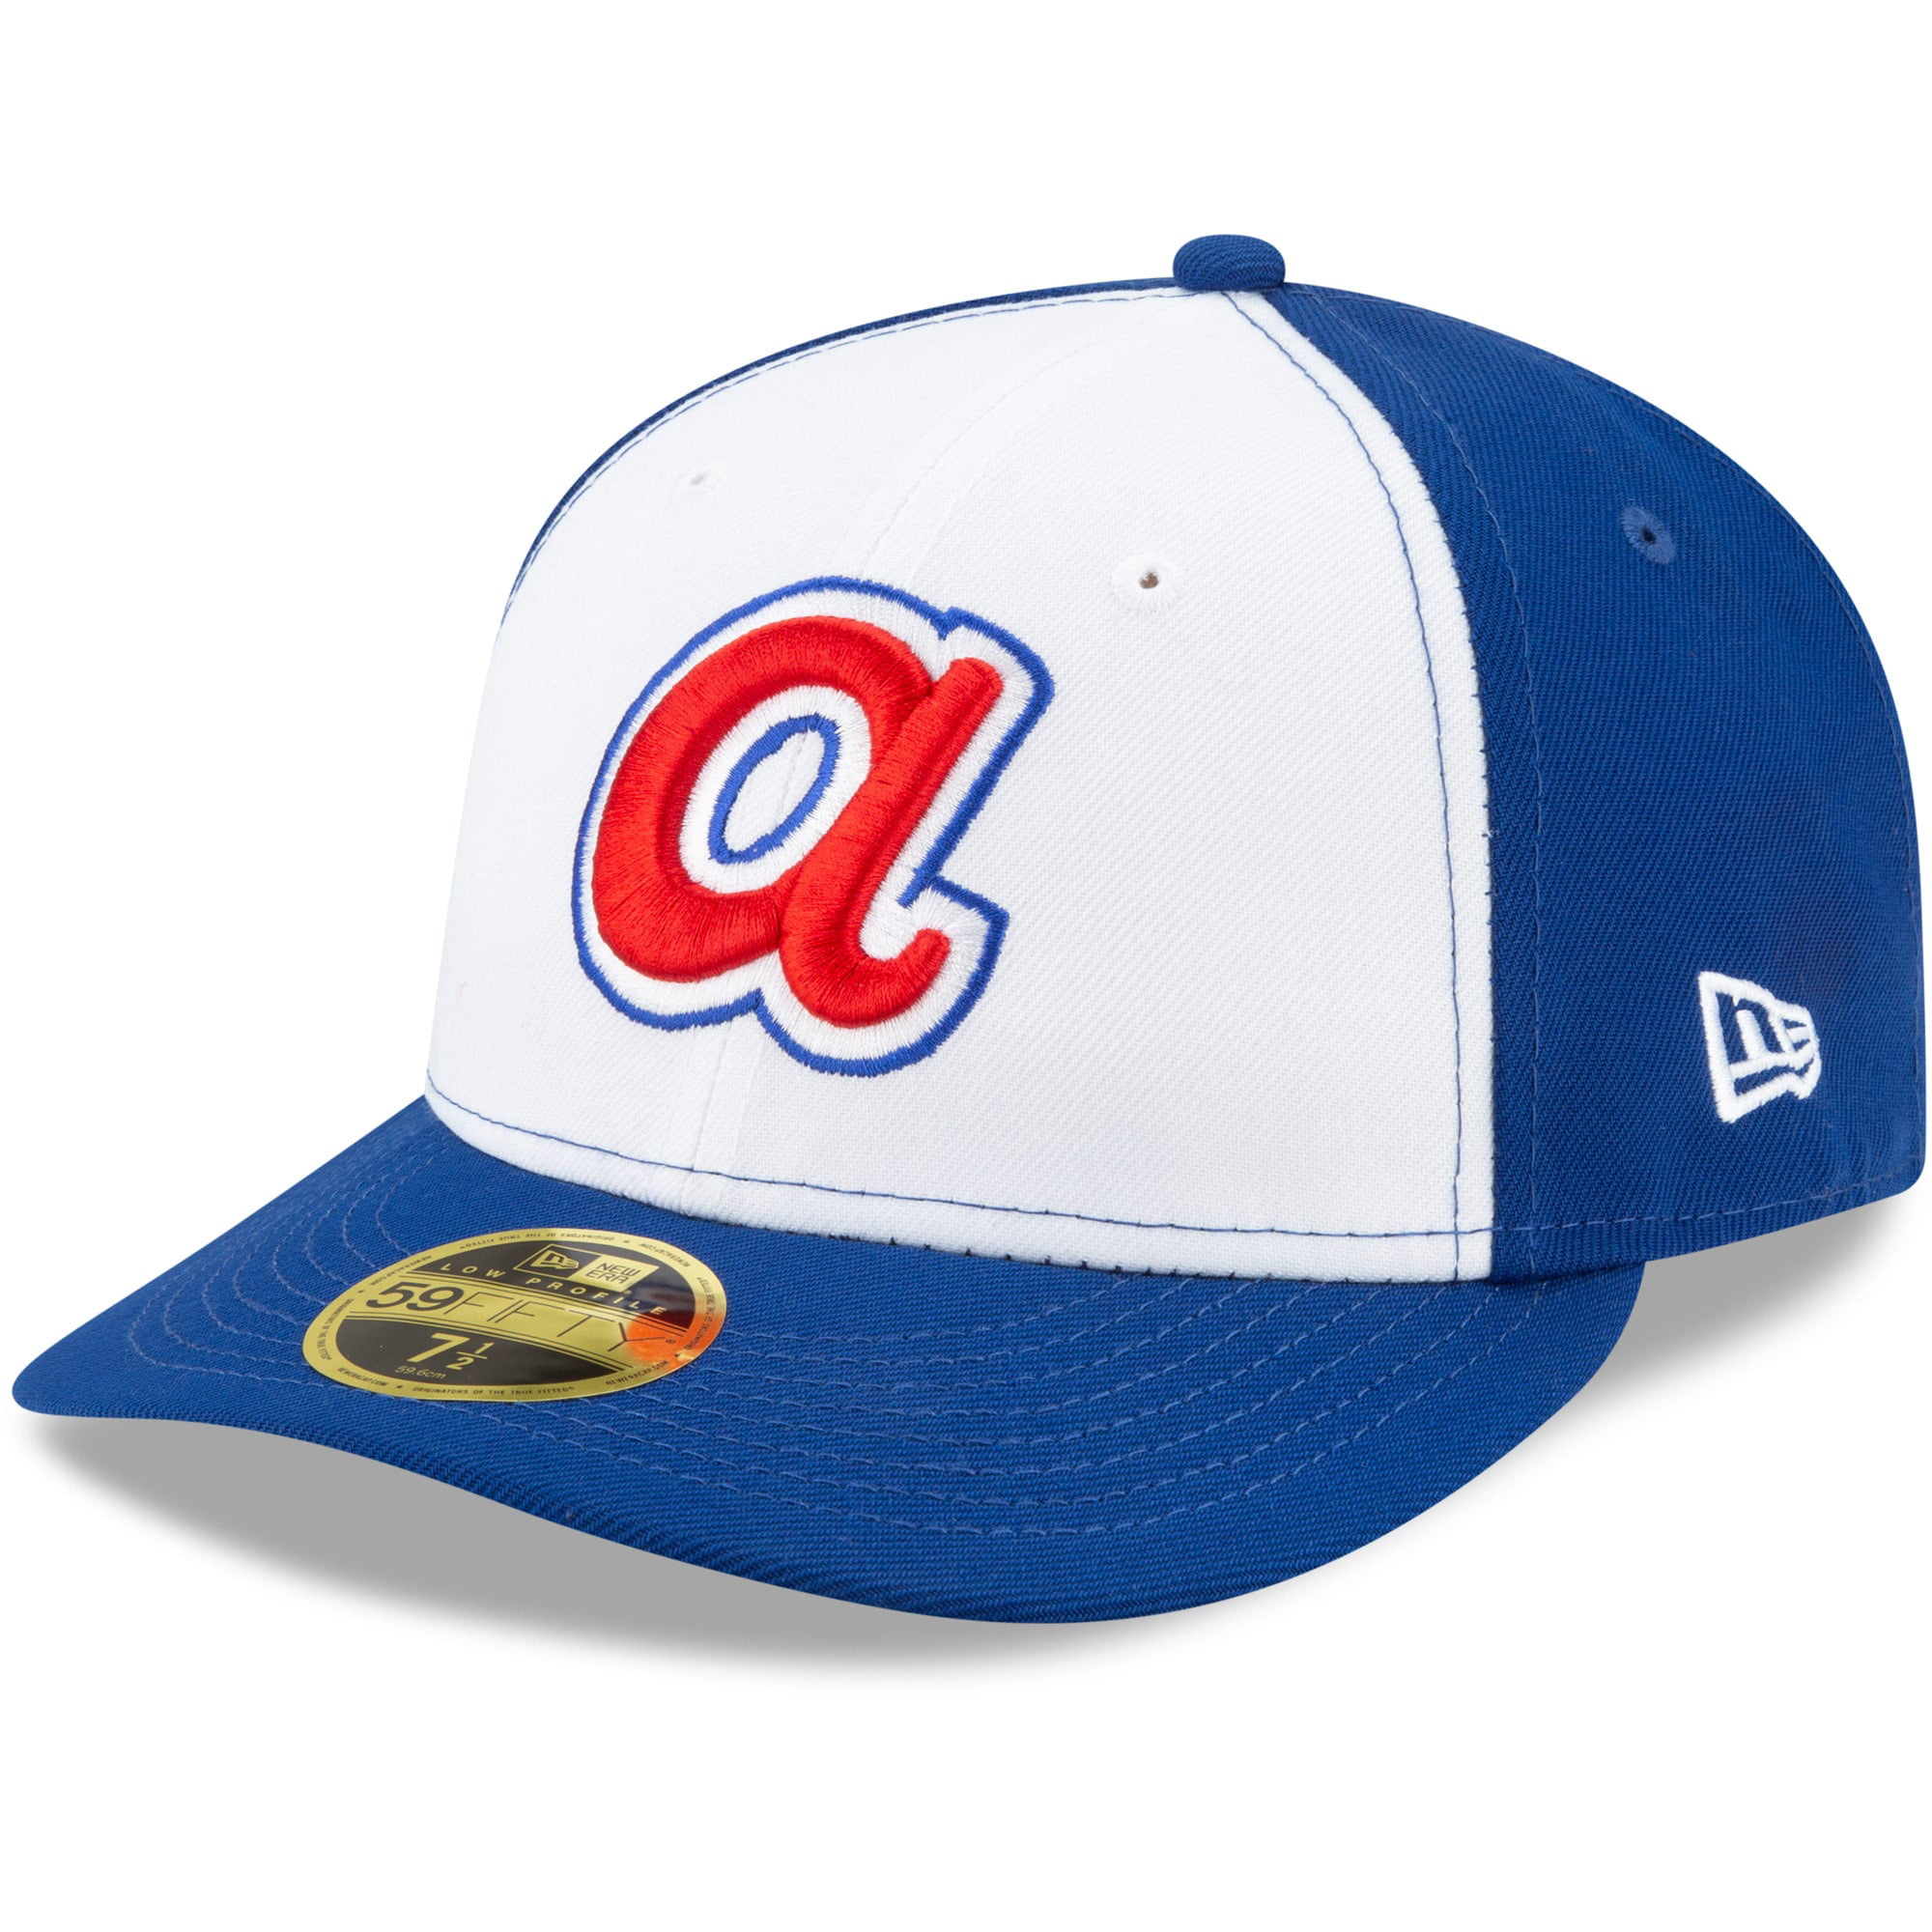 Atlanta Braves Unisex Adult Adjustable Low Profile 2021 World Series Champions Cap Hat with Embroidered White Logo A